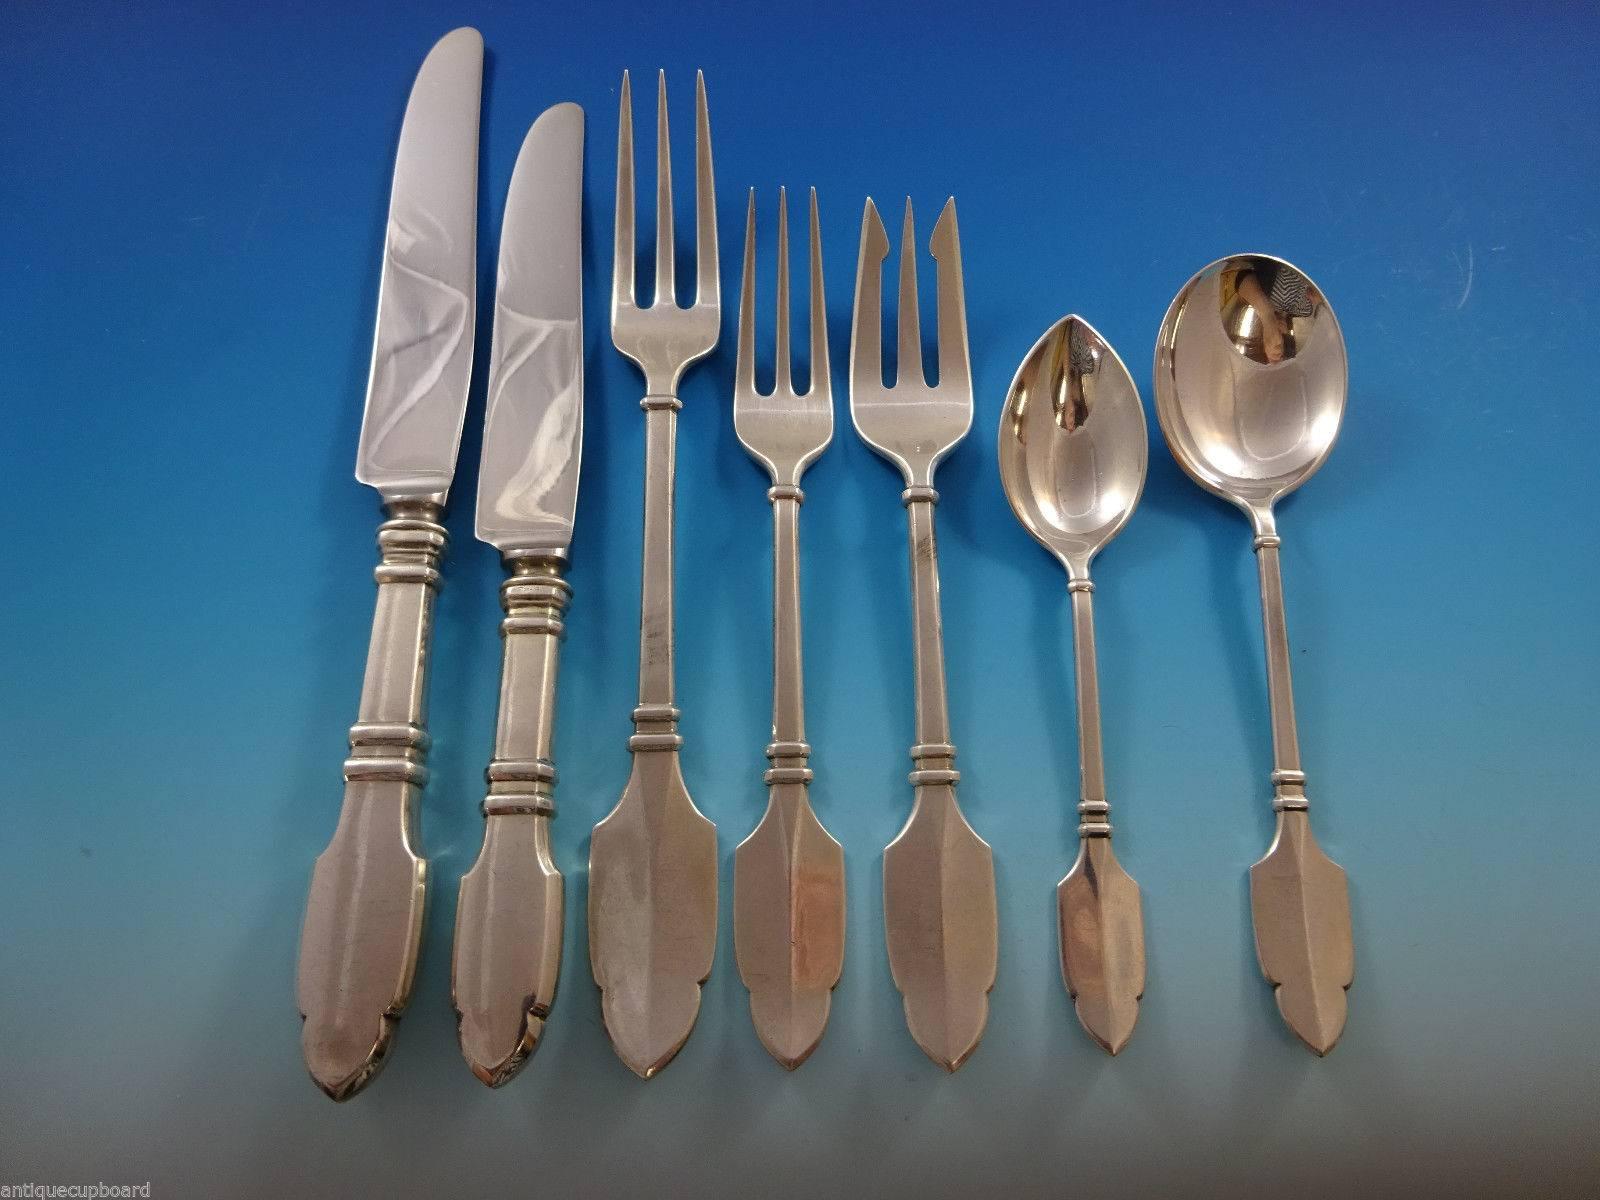 Rare Robert Bruce by Graff, Washbourne & Dunn sterling silver flatware set of 85 piece, circa 1910. This set includes:

12 dinner size knives, 9 7/8